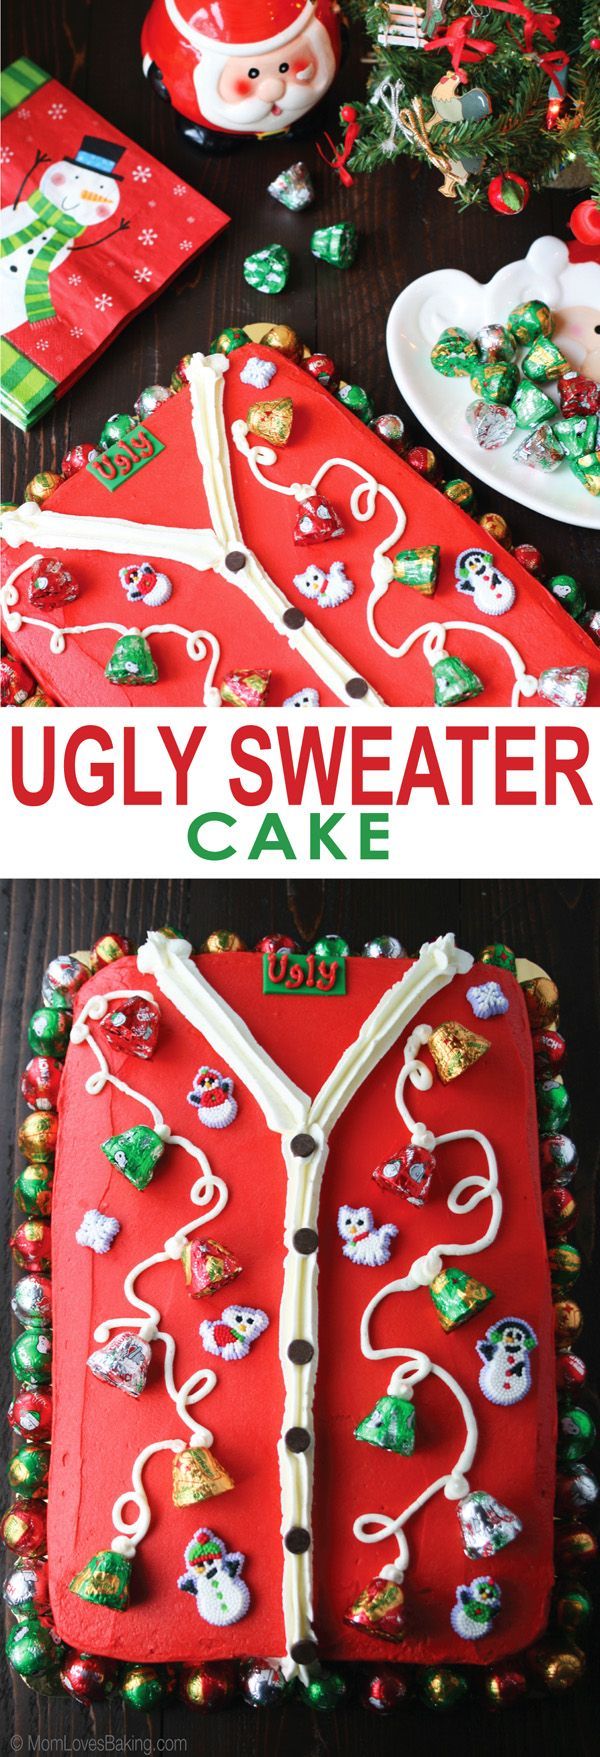 The perfect cake to take to your Ugly Sweater party. Its a yellow cake with b